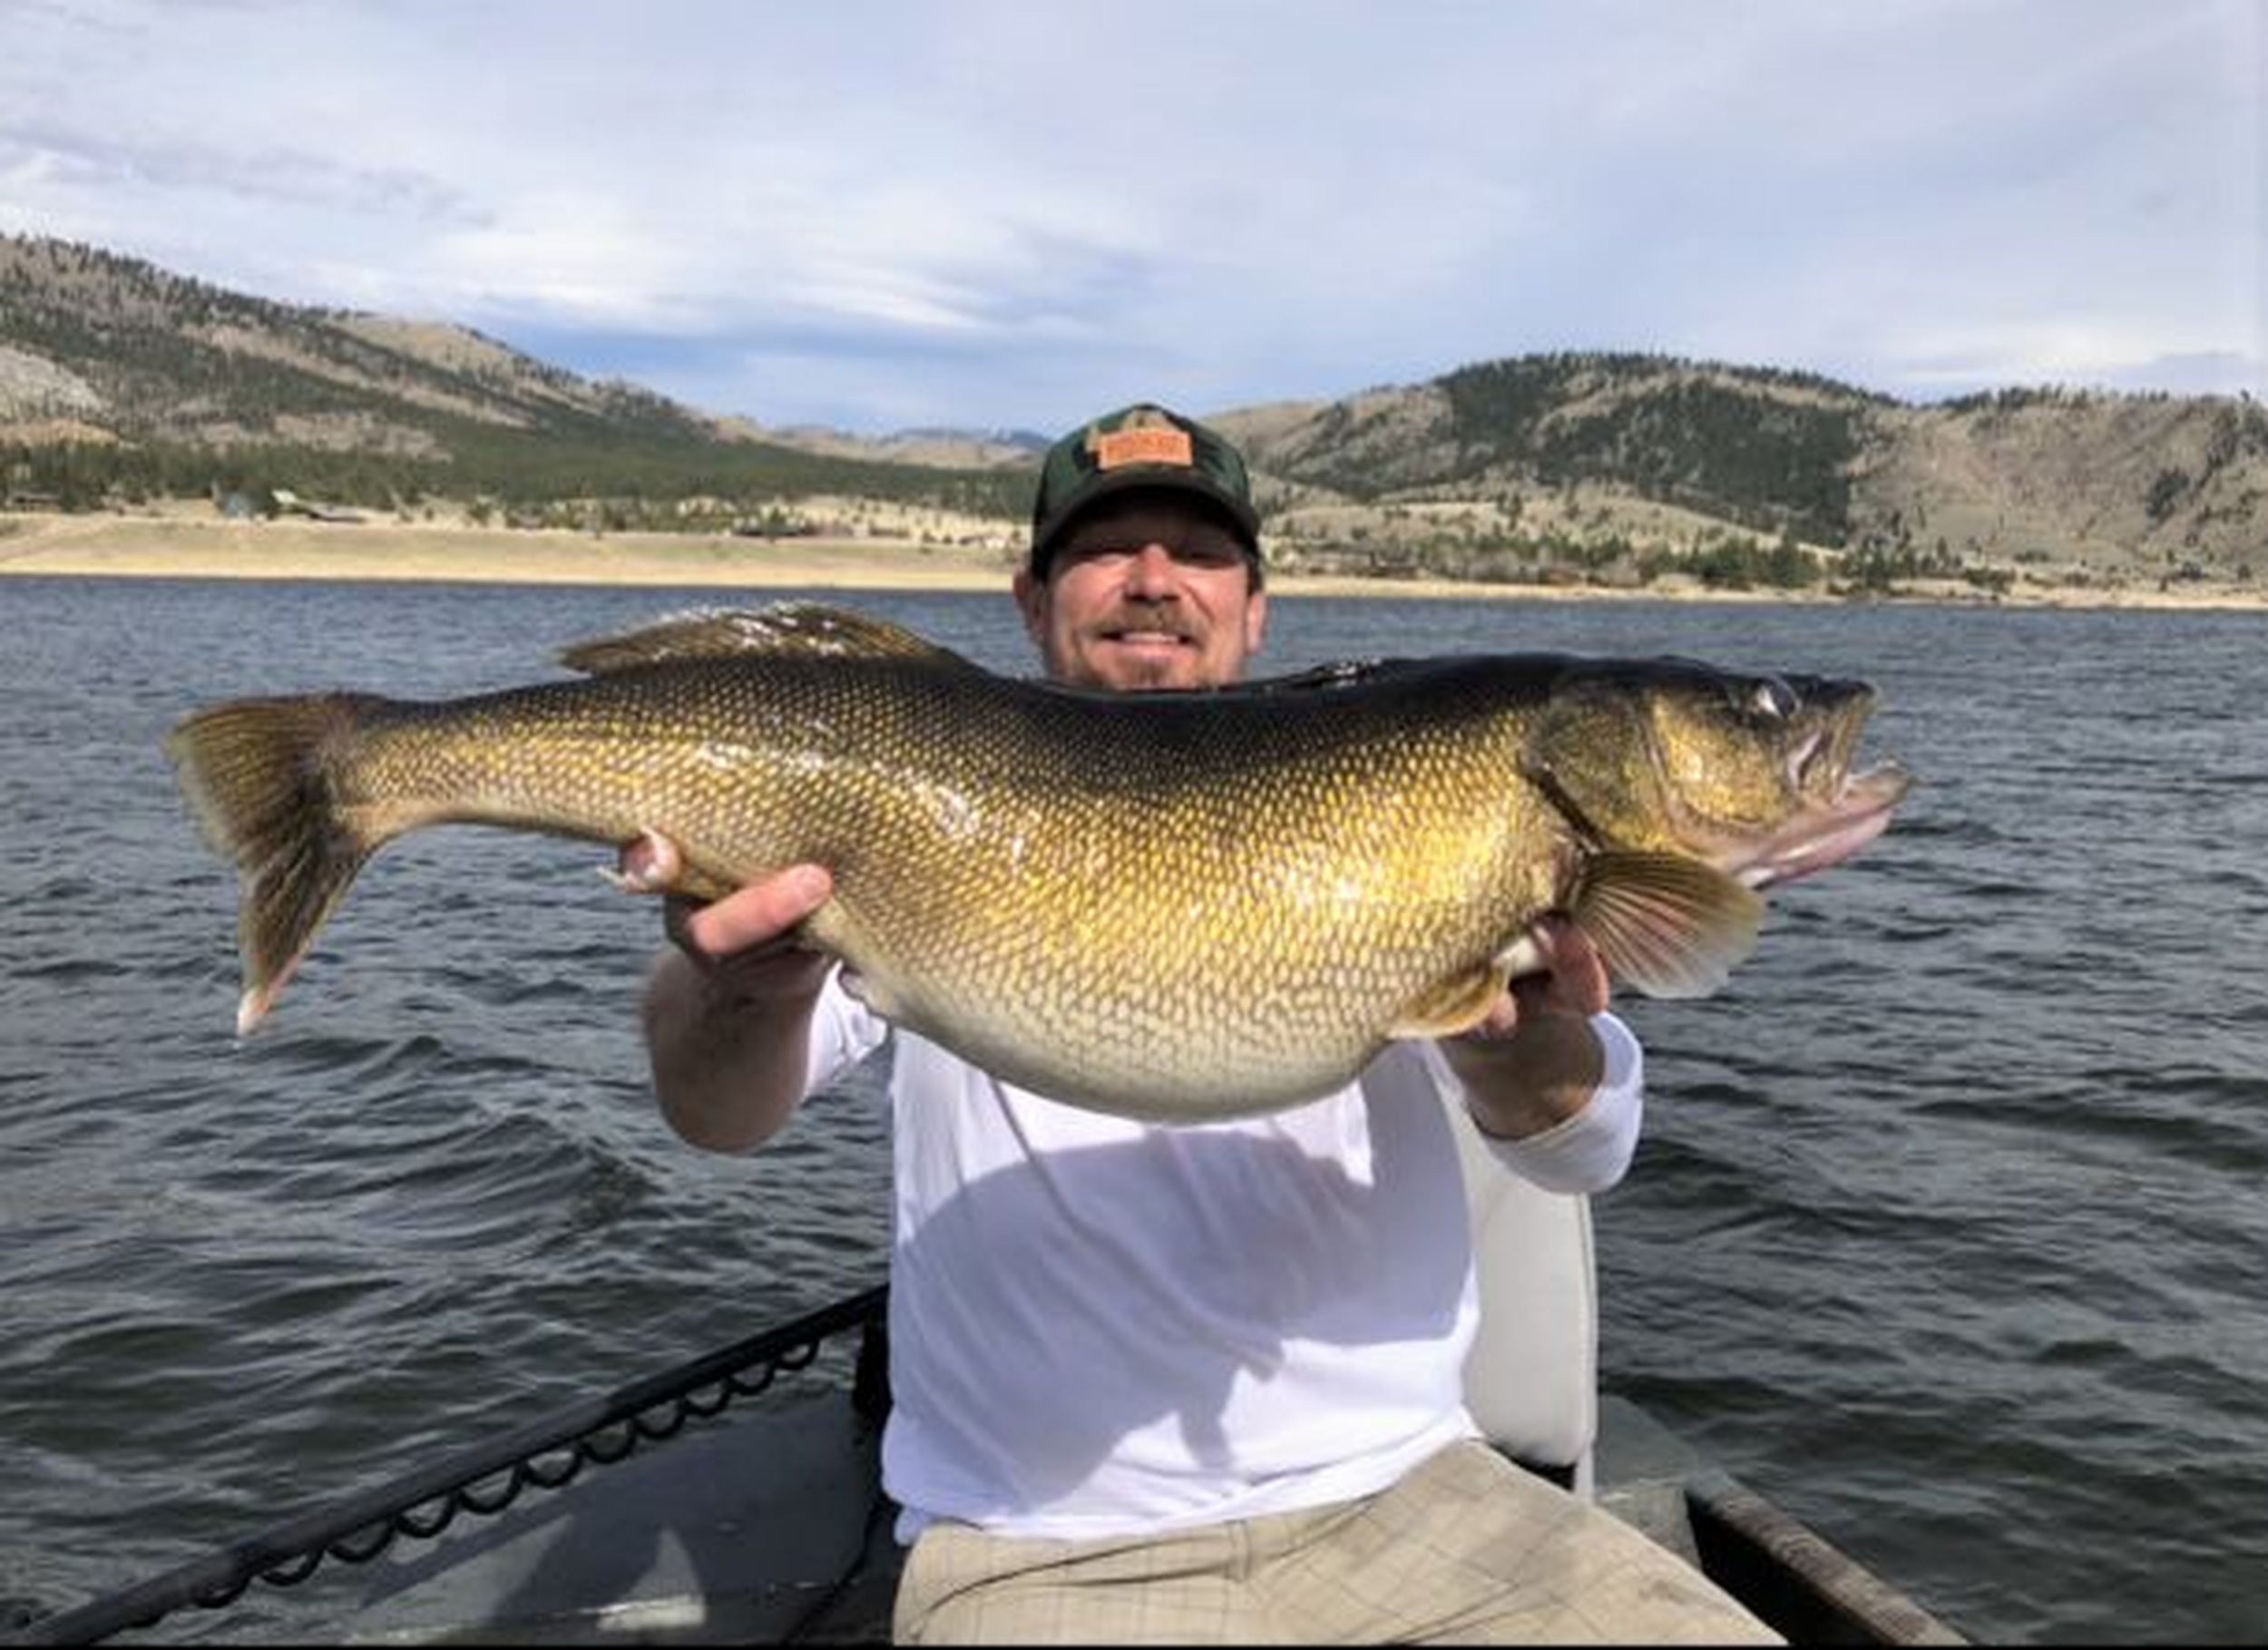 New Montana state record walleye caught, sixth state record fish since